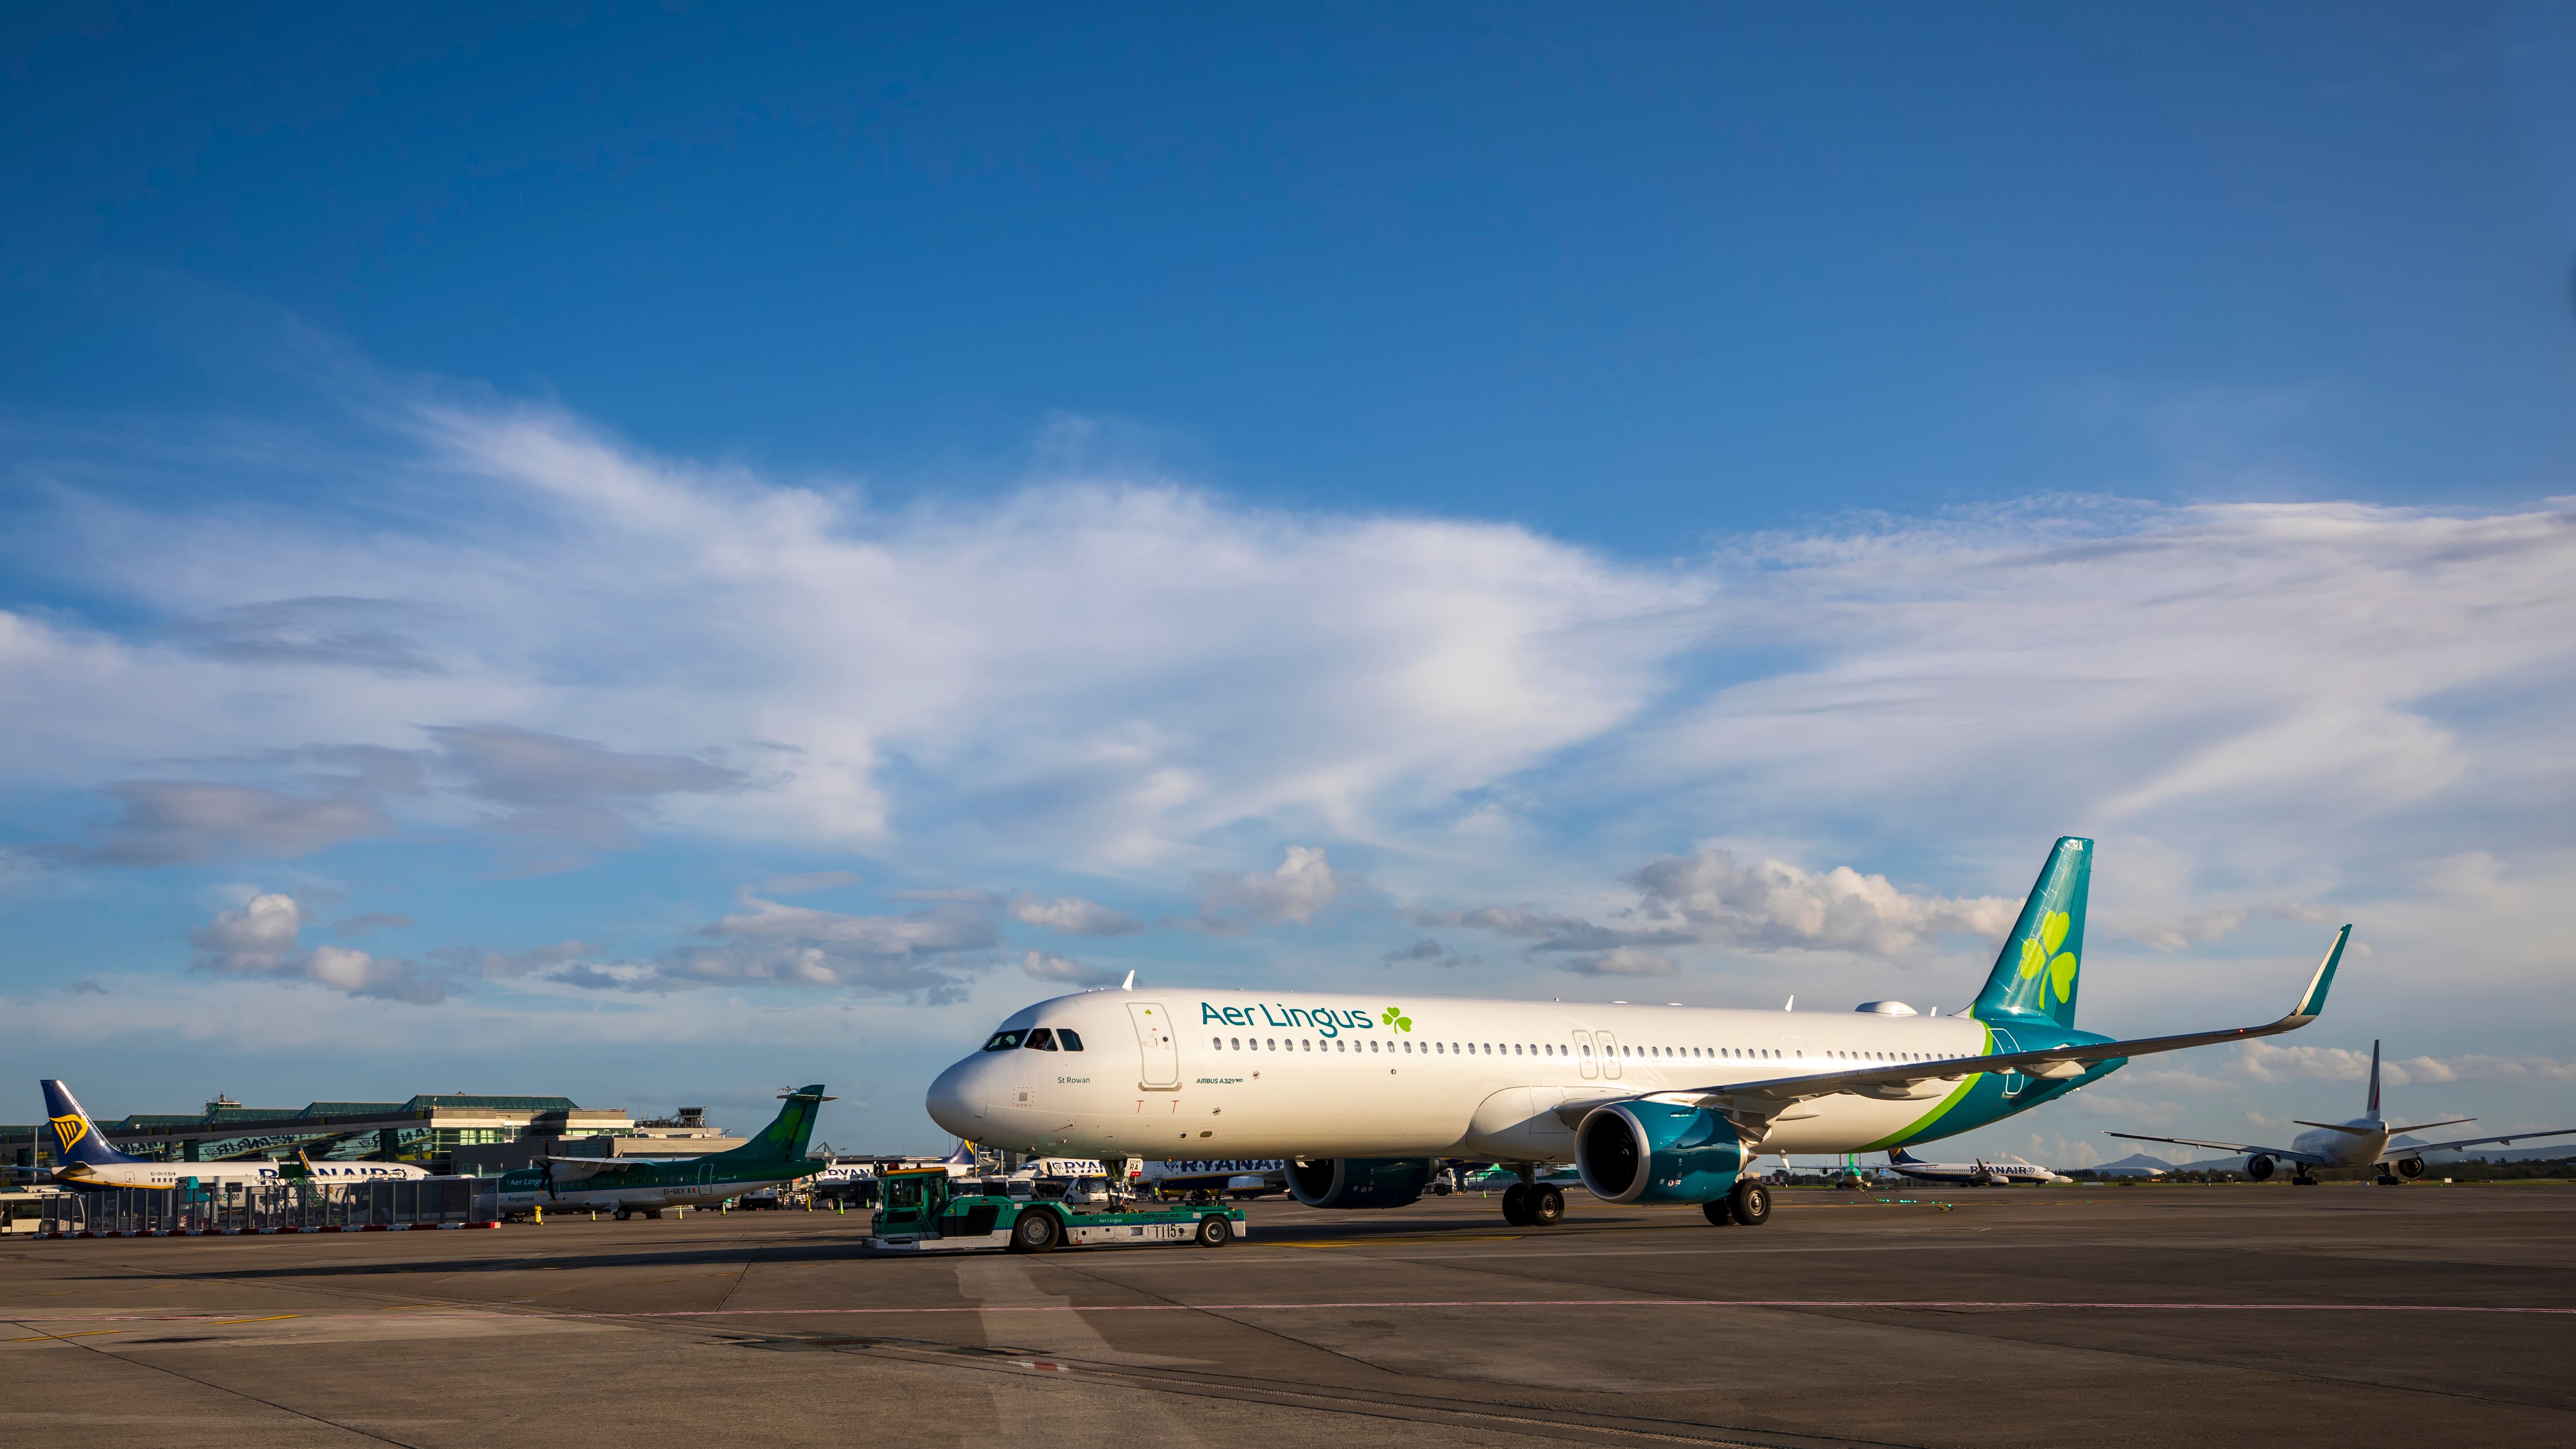 An Aer Lingus Airbus A321neo on an airport apron.